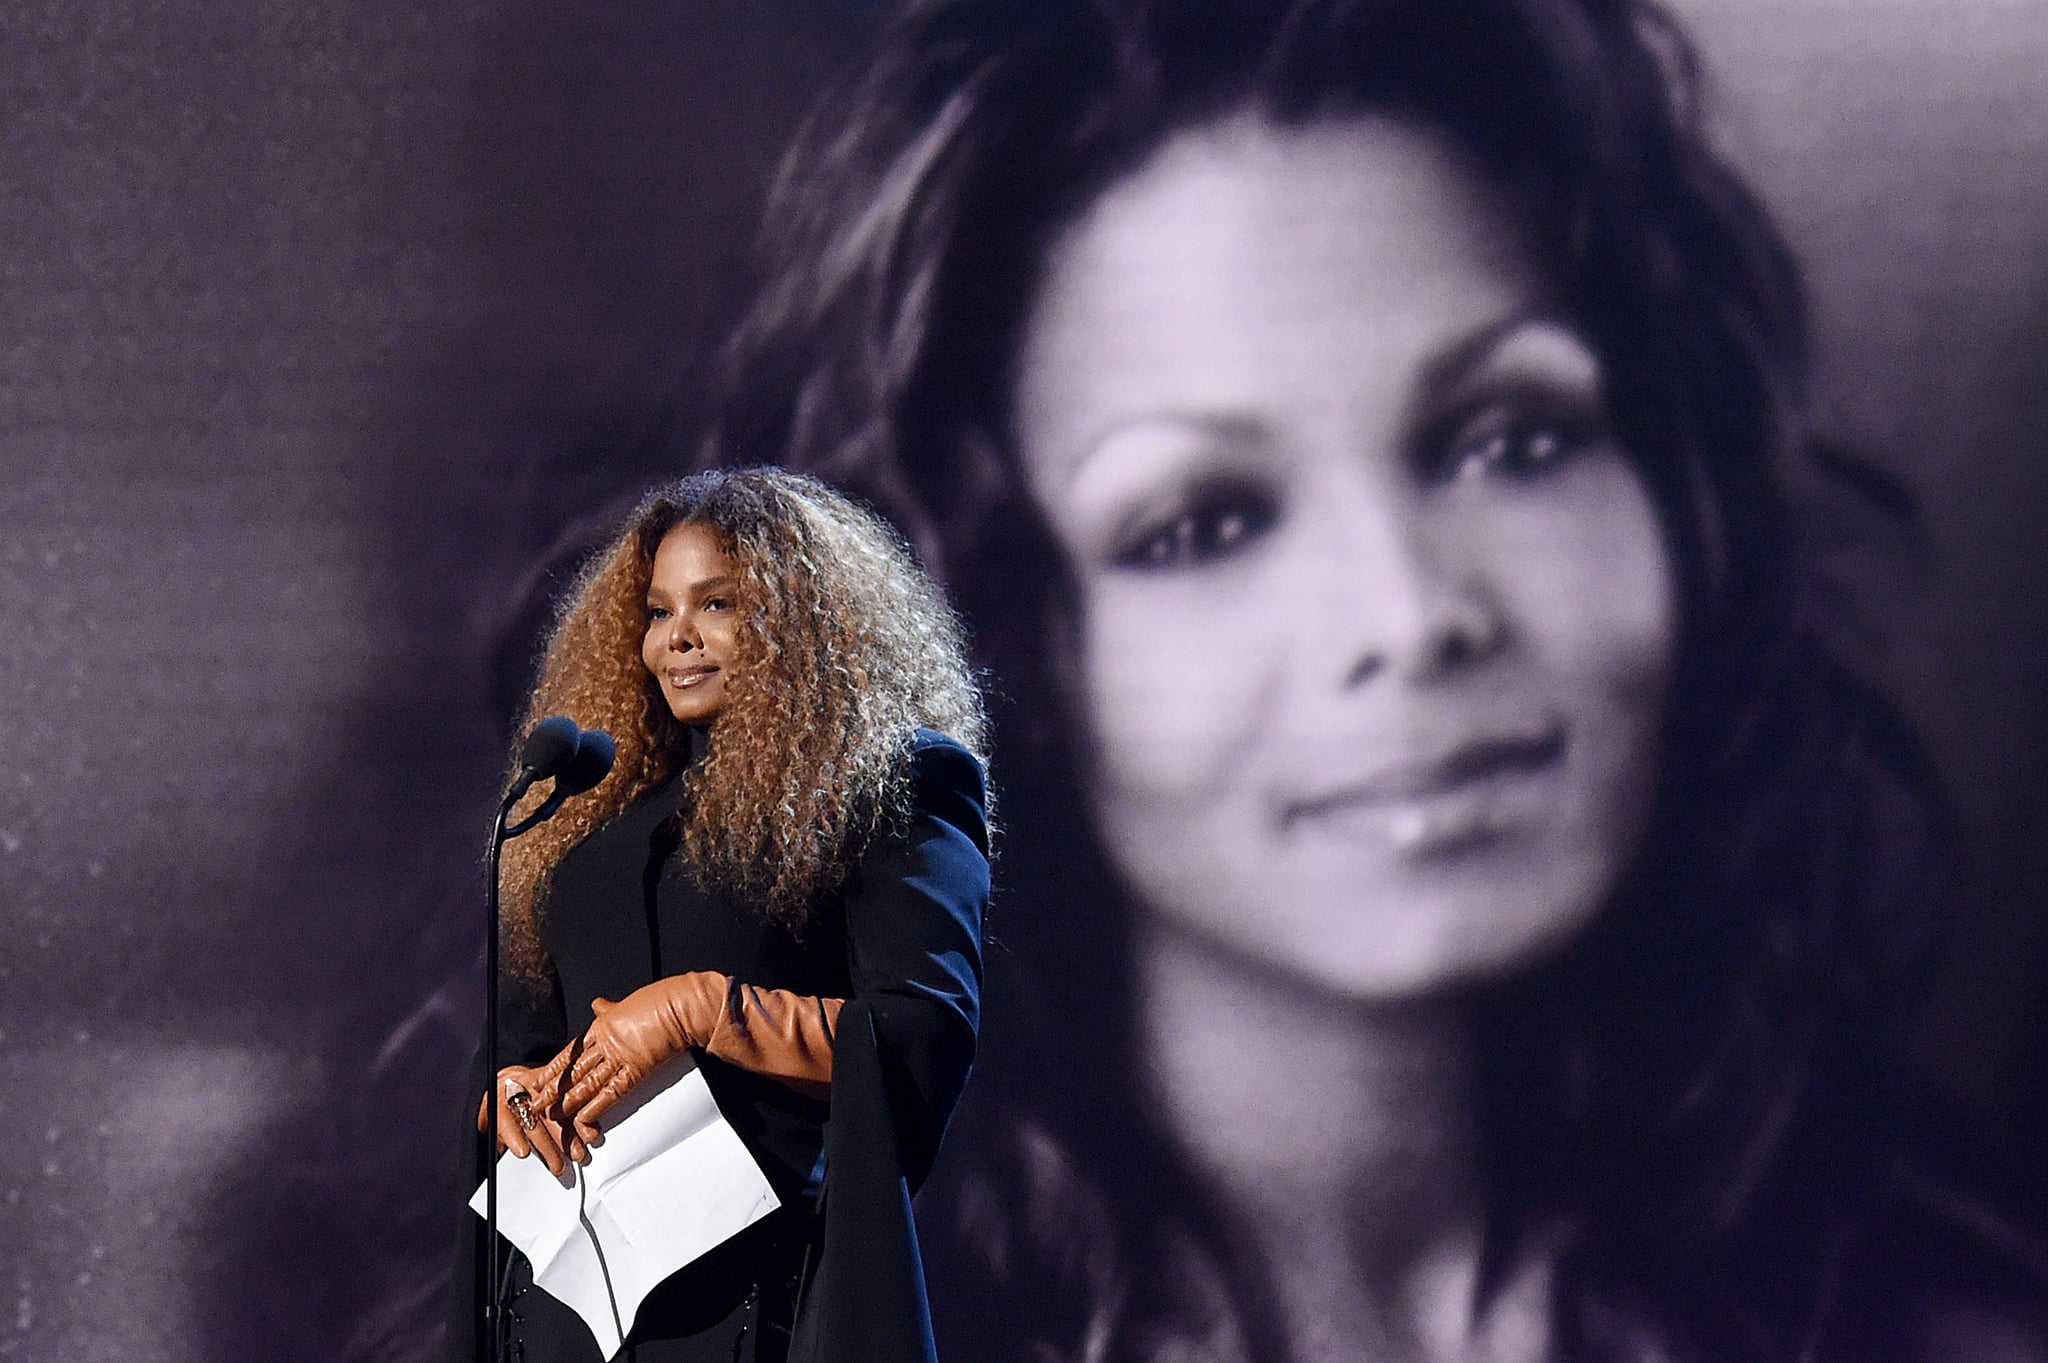 NEW YORK, NEW YORK - MARCH 29: Inductee Janet Jackson speaks onstage during the 2019 Rock & Roll Hall Of Fame Induction Ceremony - Show at Barclays Center on March 29, 2019 in New York City. (Photo by Jamie McCarthy/Getty Images For The Rock and Roll Hall of Fame)